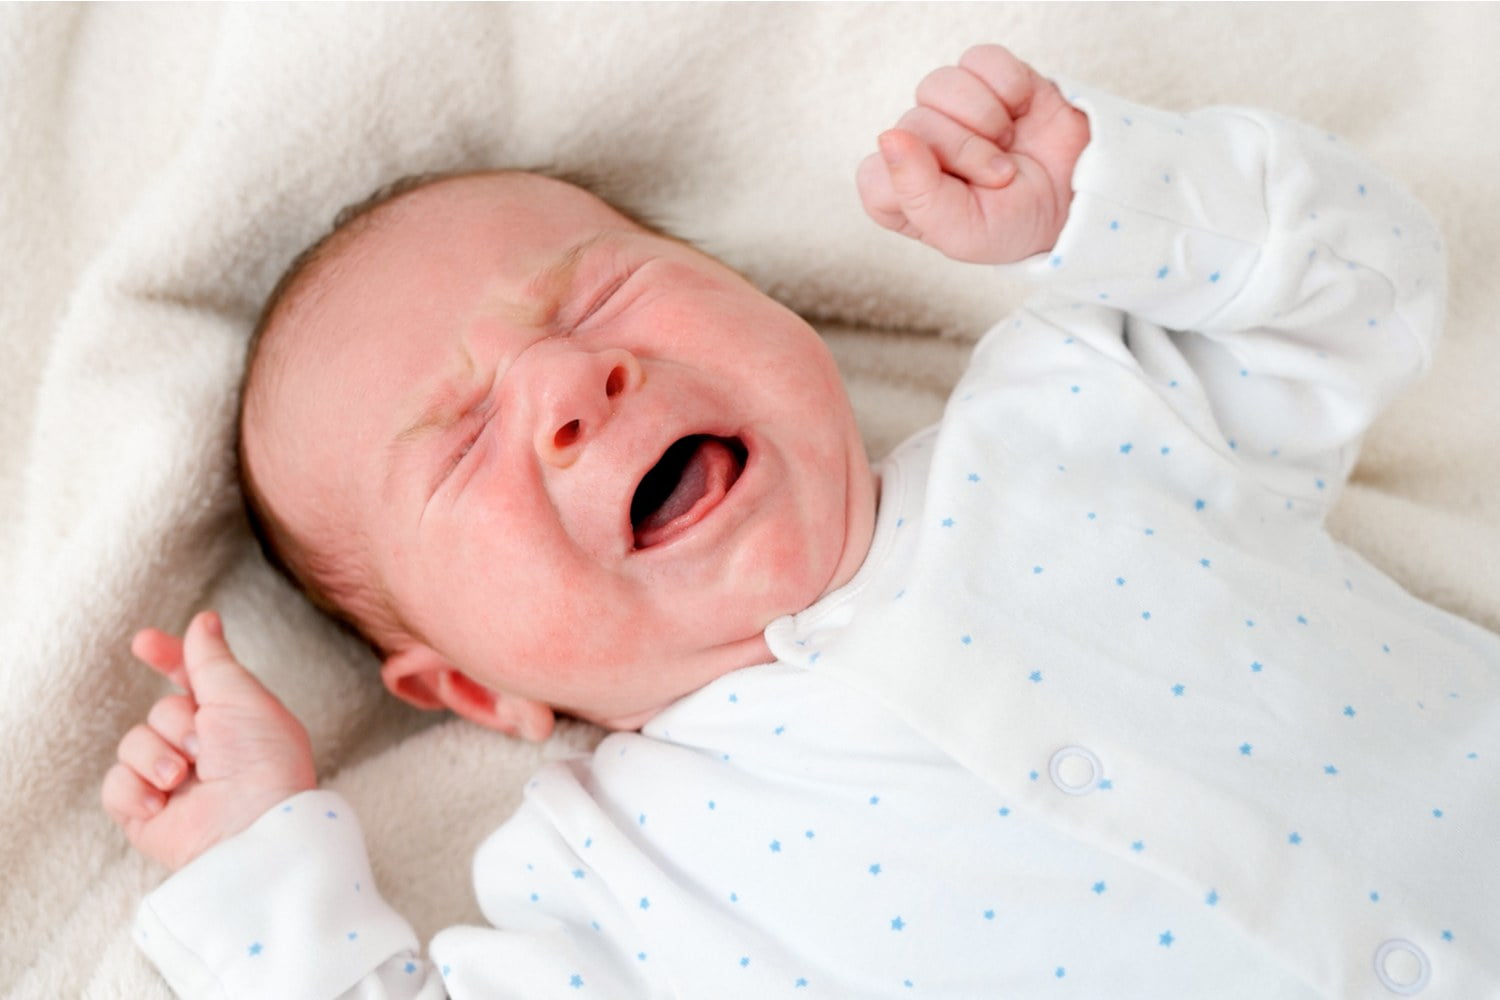 Grunting Baby Syndrome in newborns